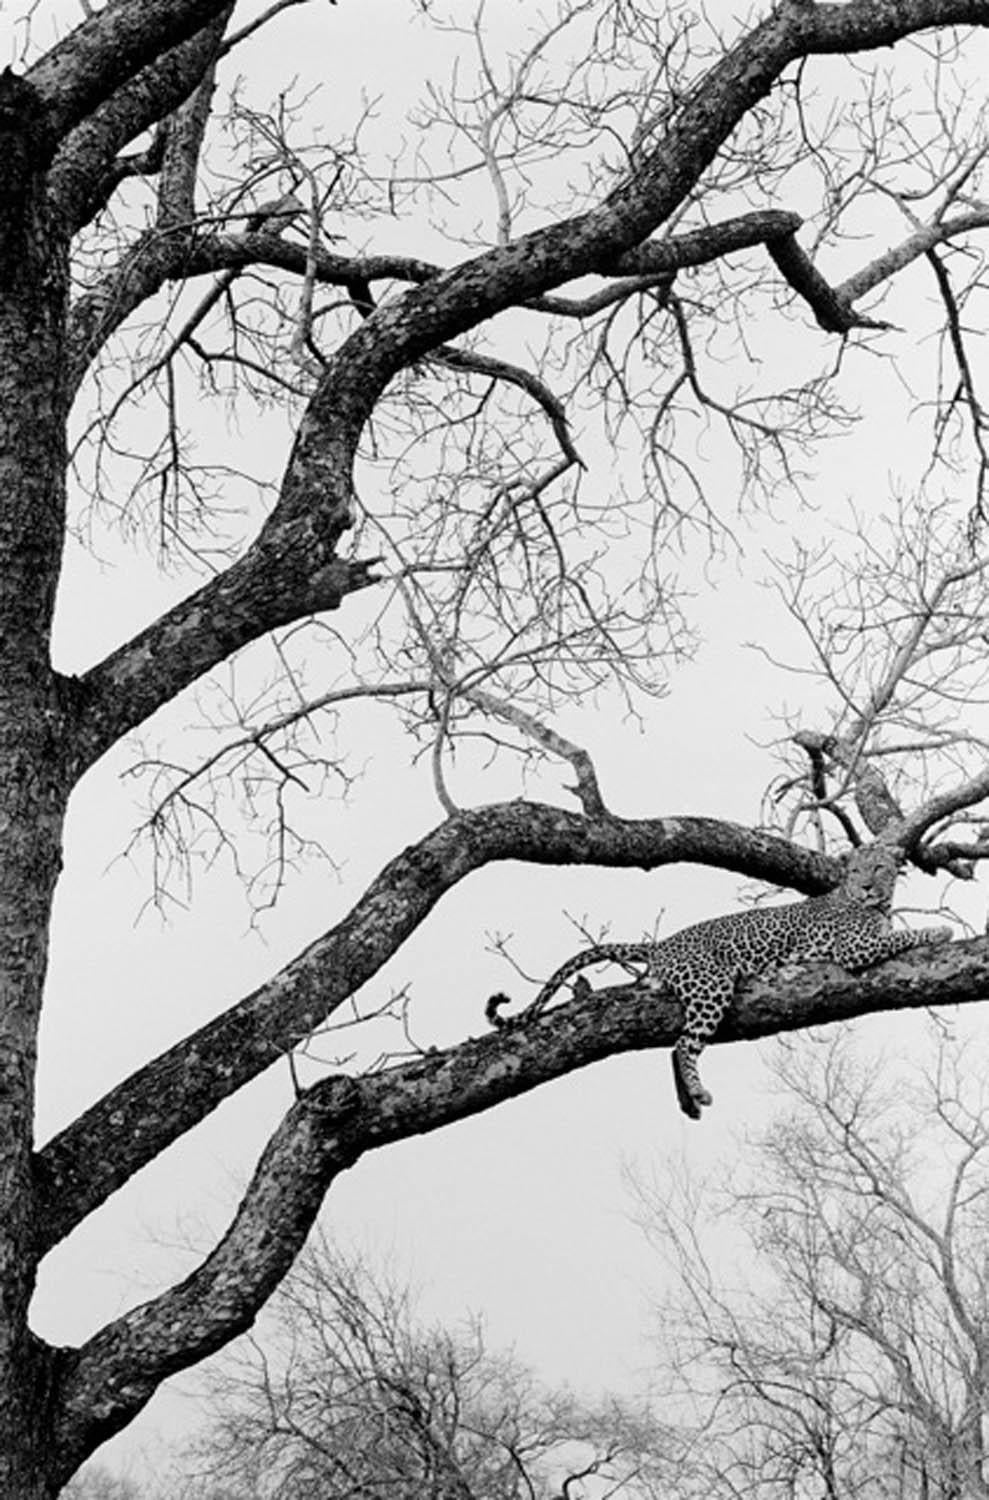 Robin Rice Black and White Photograph - Leopard in Tree, Kruger Park, South Africa, 2008